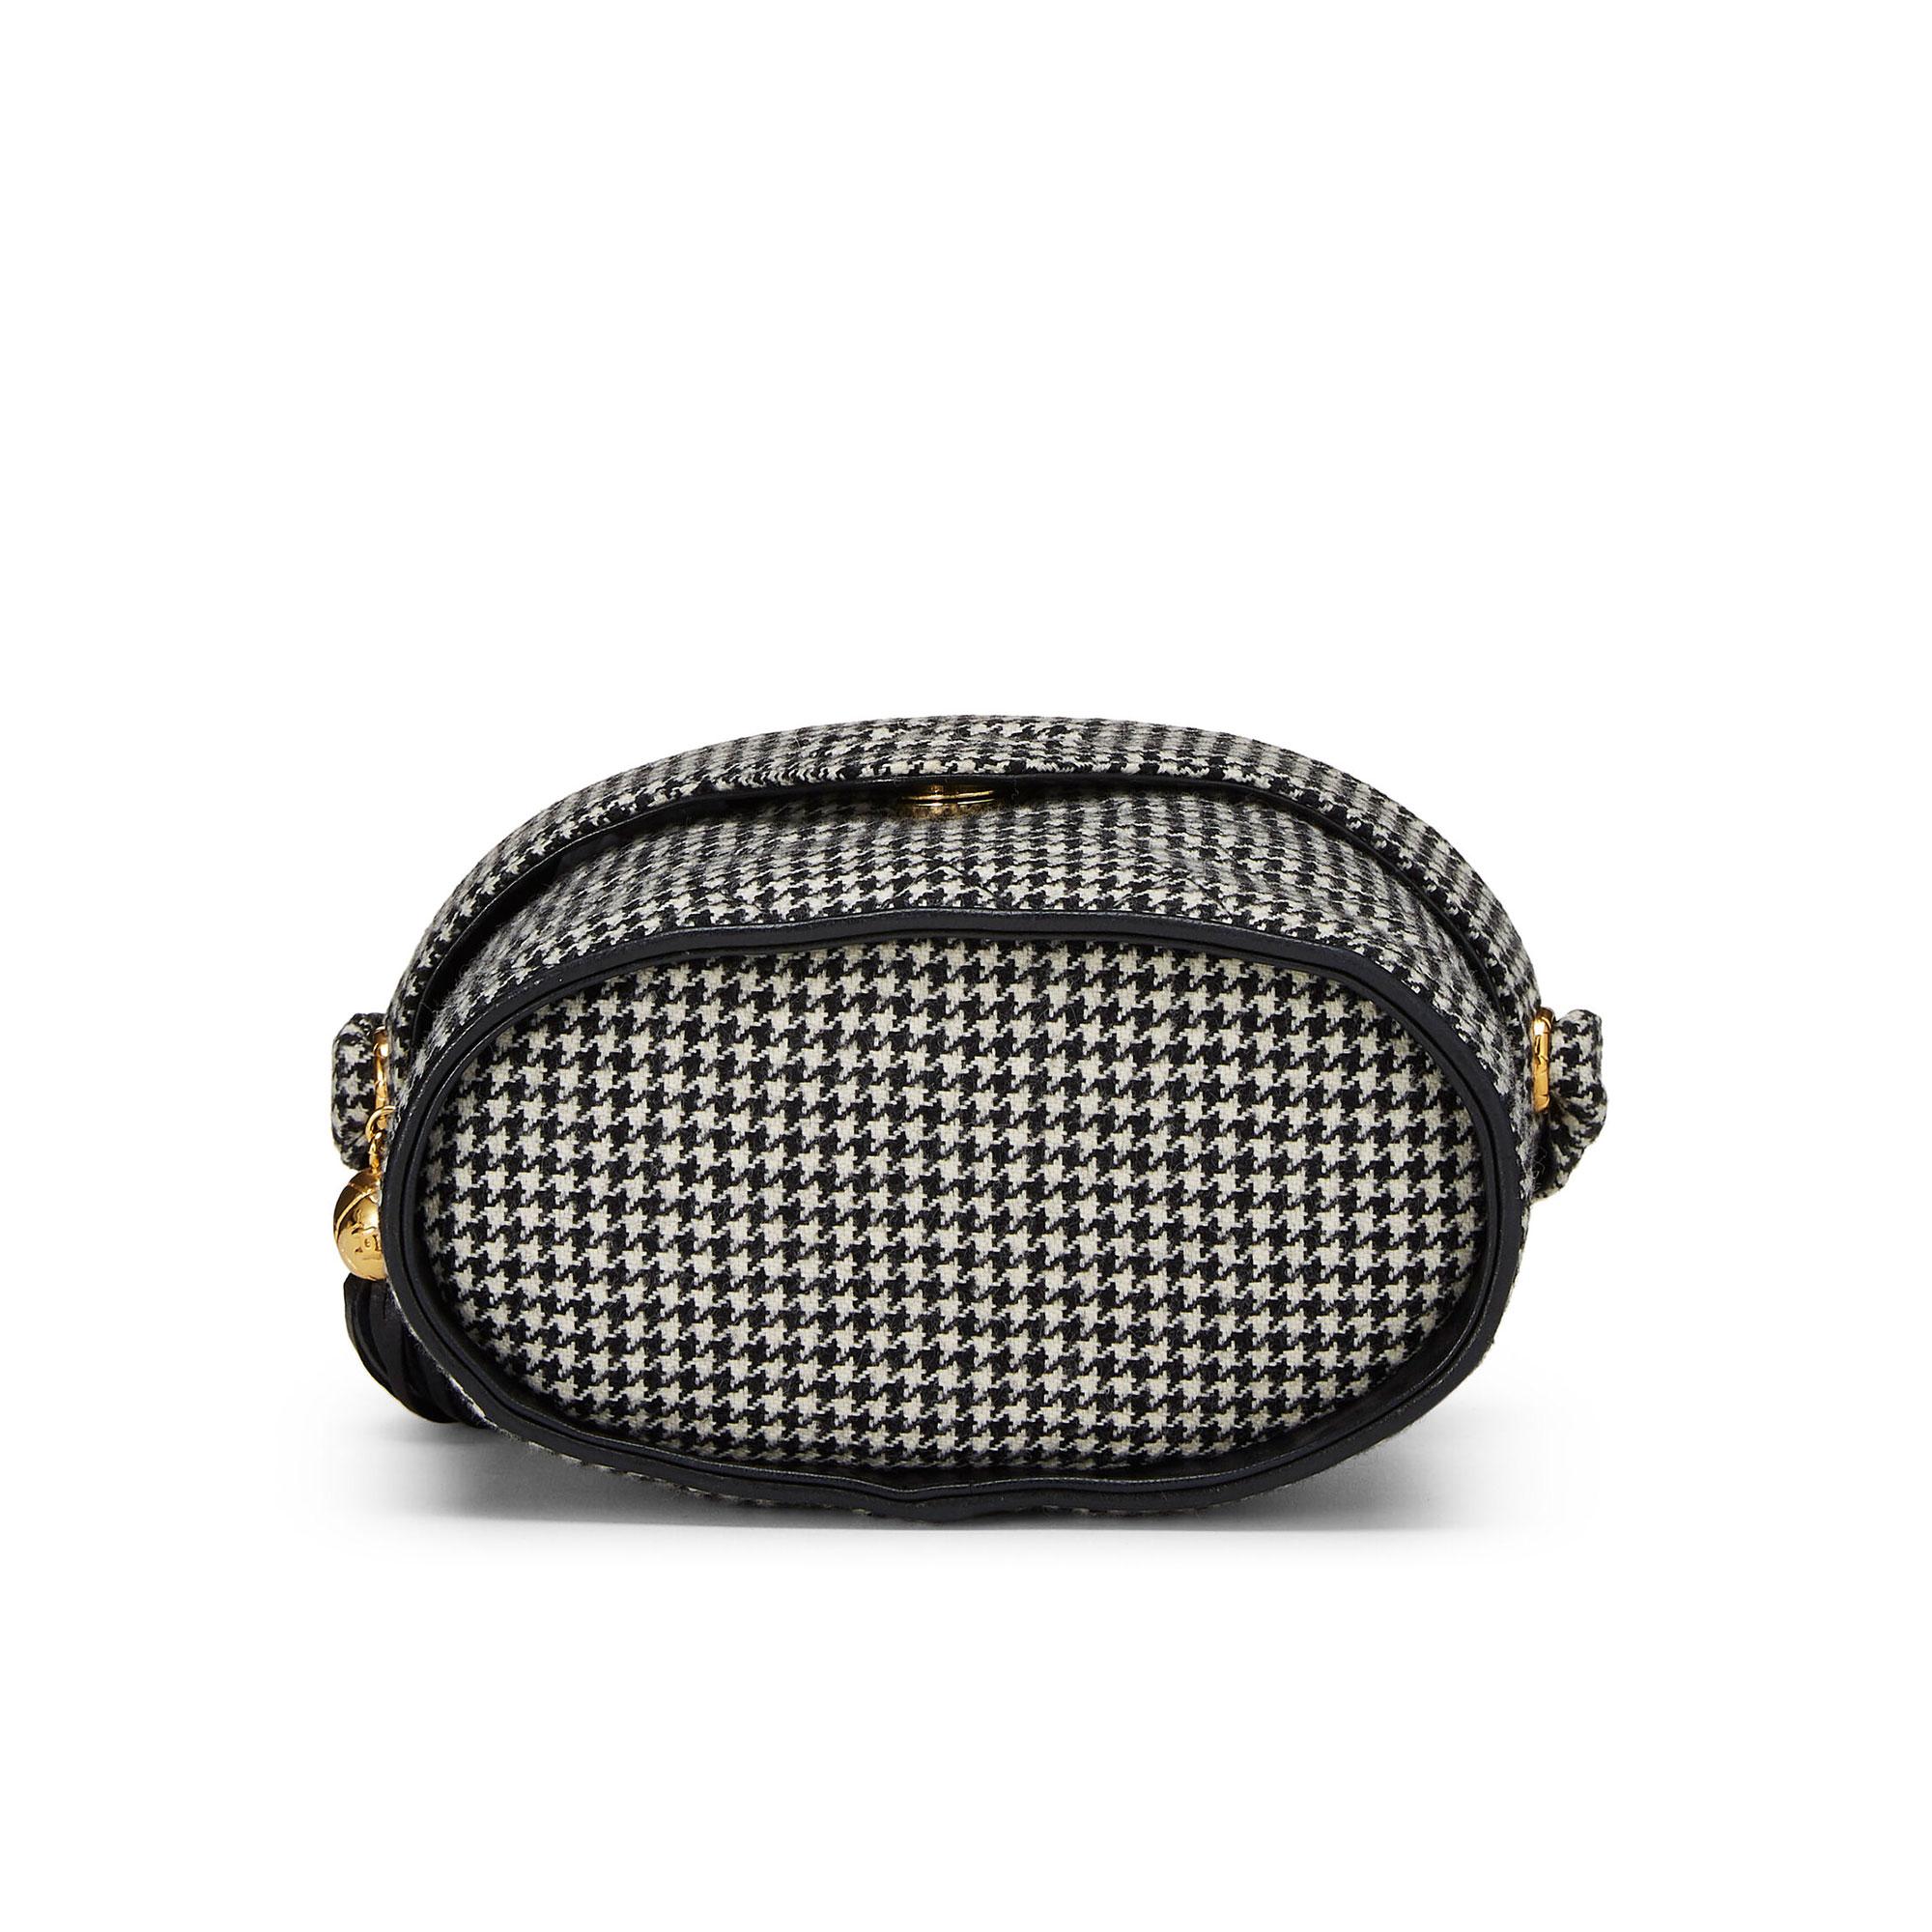 Chanel Vanity Case Very Rare Vintage 1990’s Houndstooth Black and White Wool Bag For Sale 8